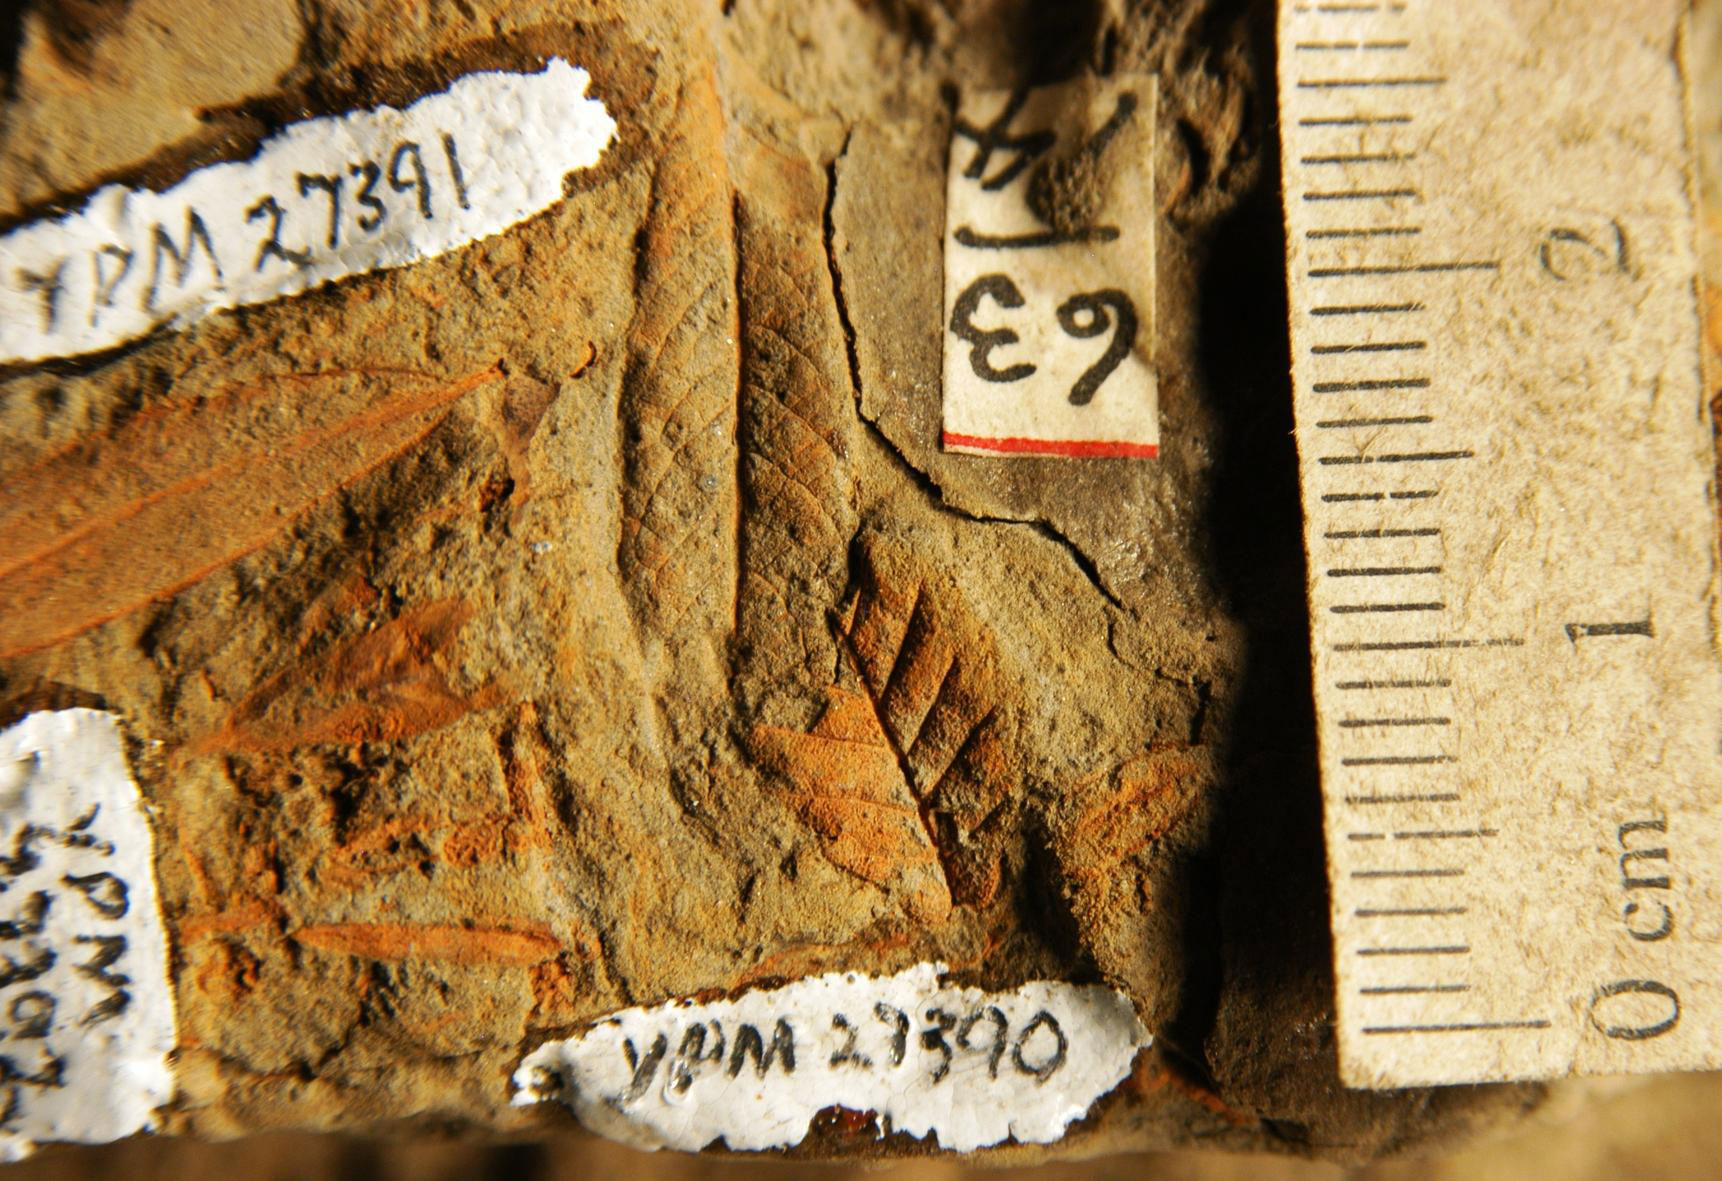 Photograph showing leaf impressions in rock matrix from the Pleistocene of Vermont. The scale at the right edge of the image is nearly 3 centimeters long.